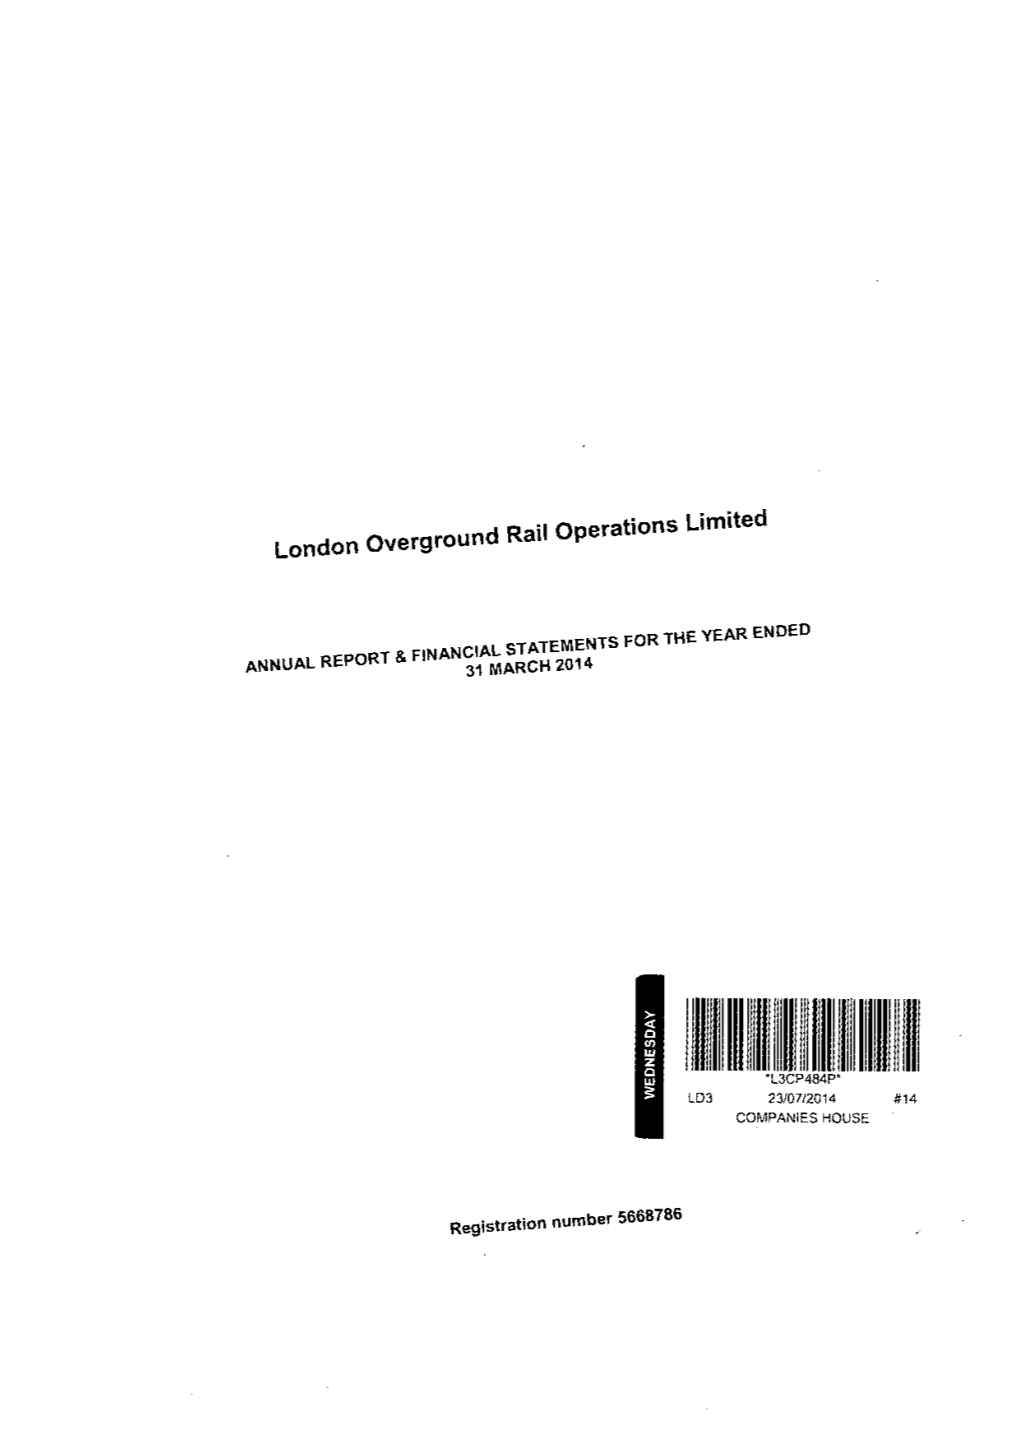 London Overground Rail Operations Limited Directors' Report and Accounts 2014